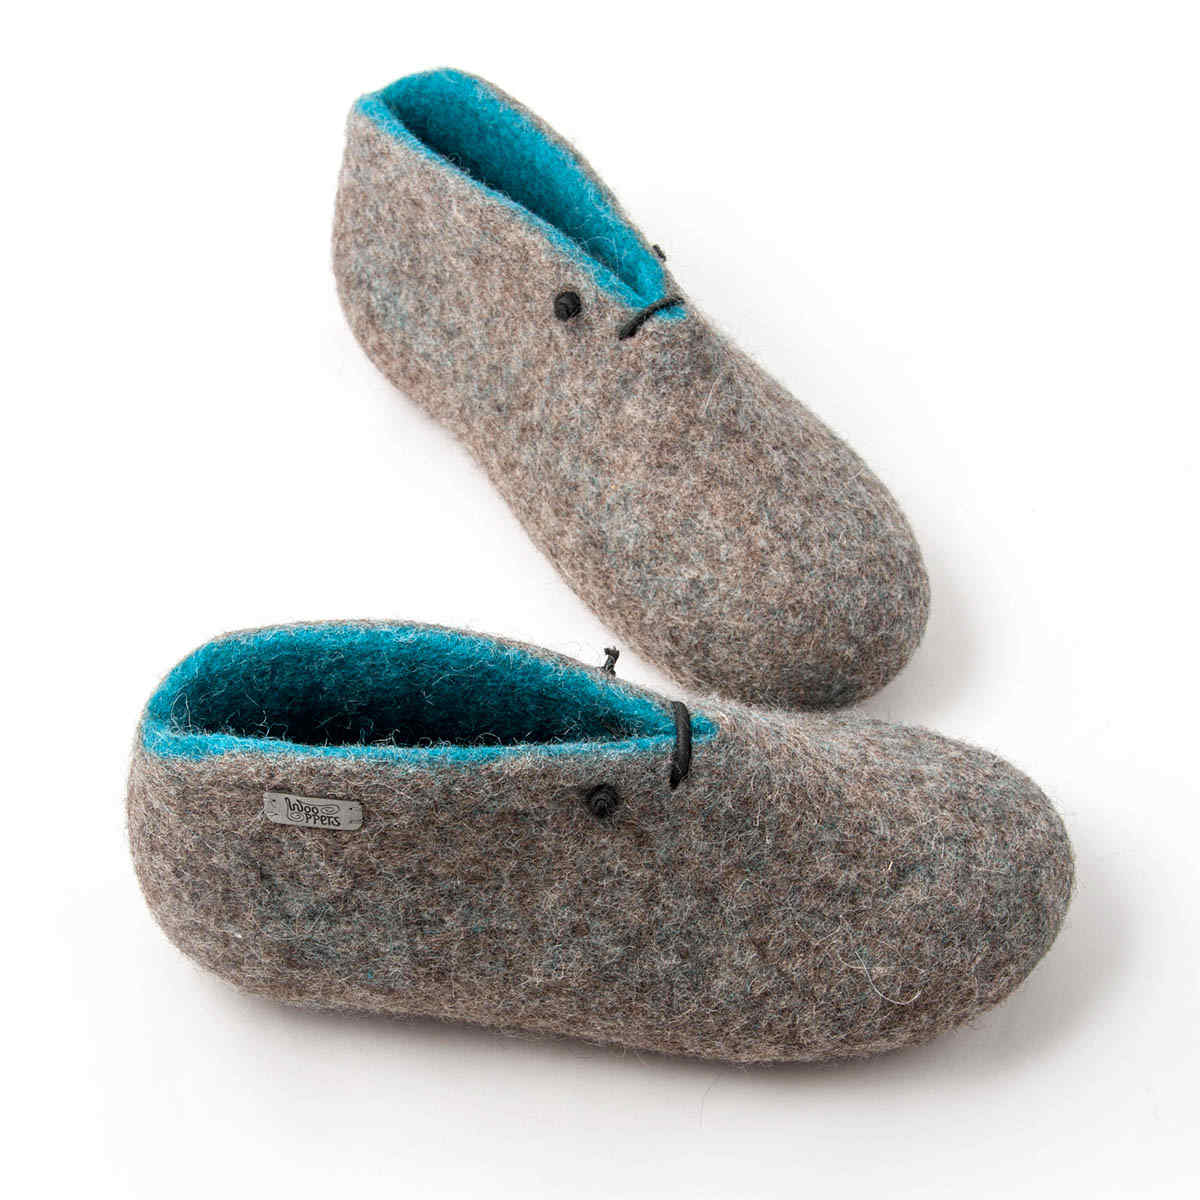 Bootie slippers in grey and blue